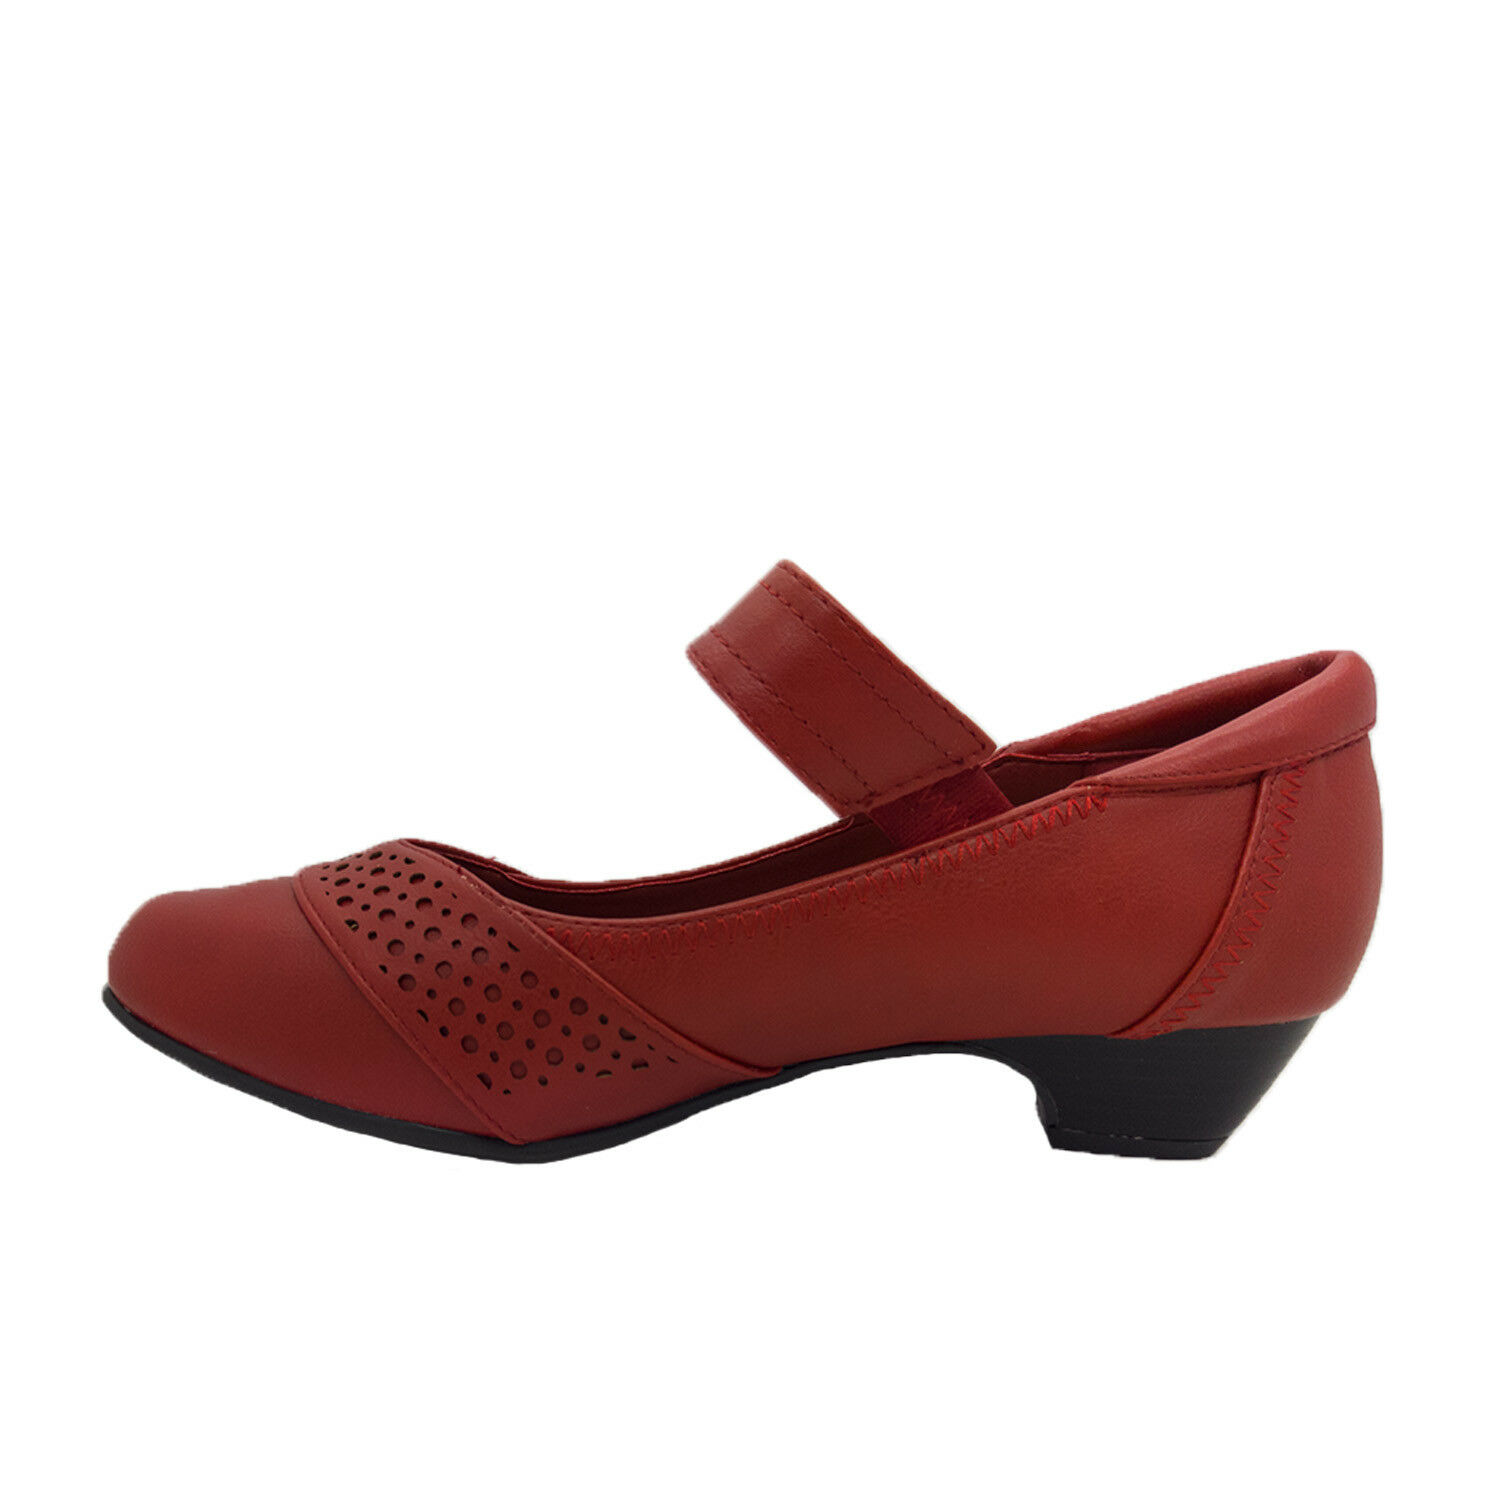 Ladies Shoes Step On Air Adele Mary Jane Heel Hook and Loop 3 Colours Size 6-11